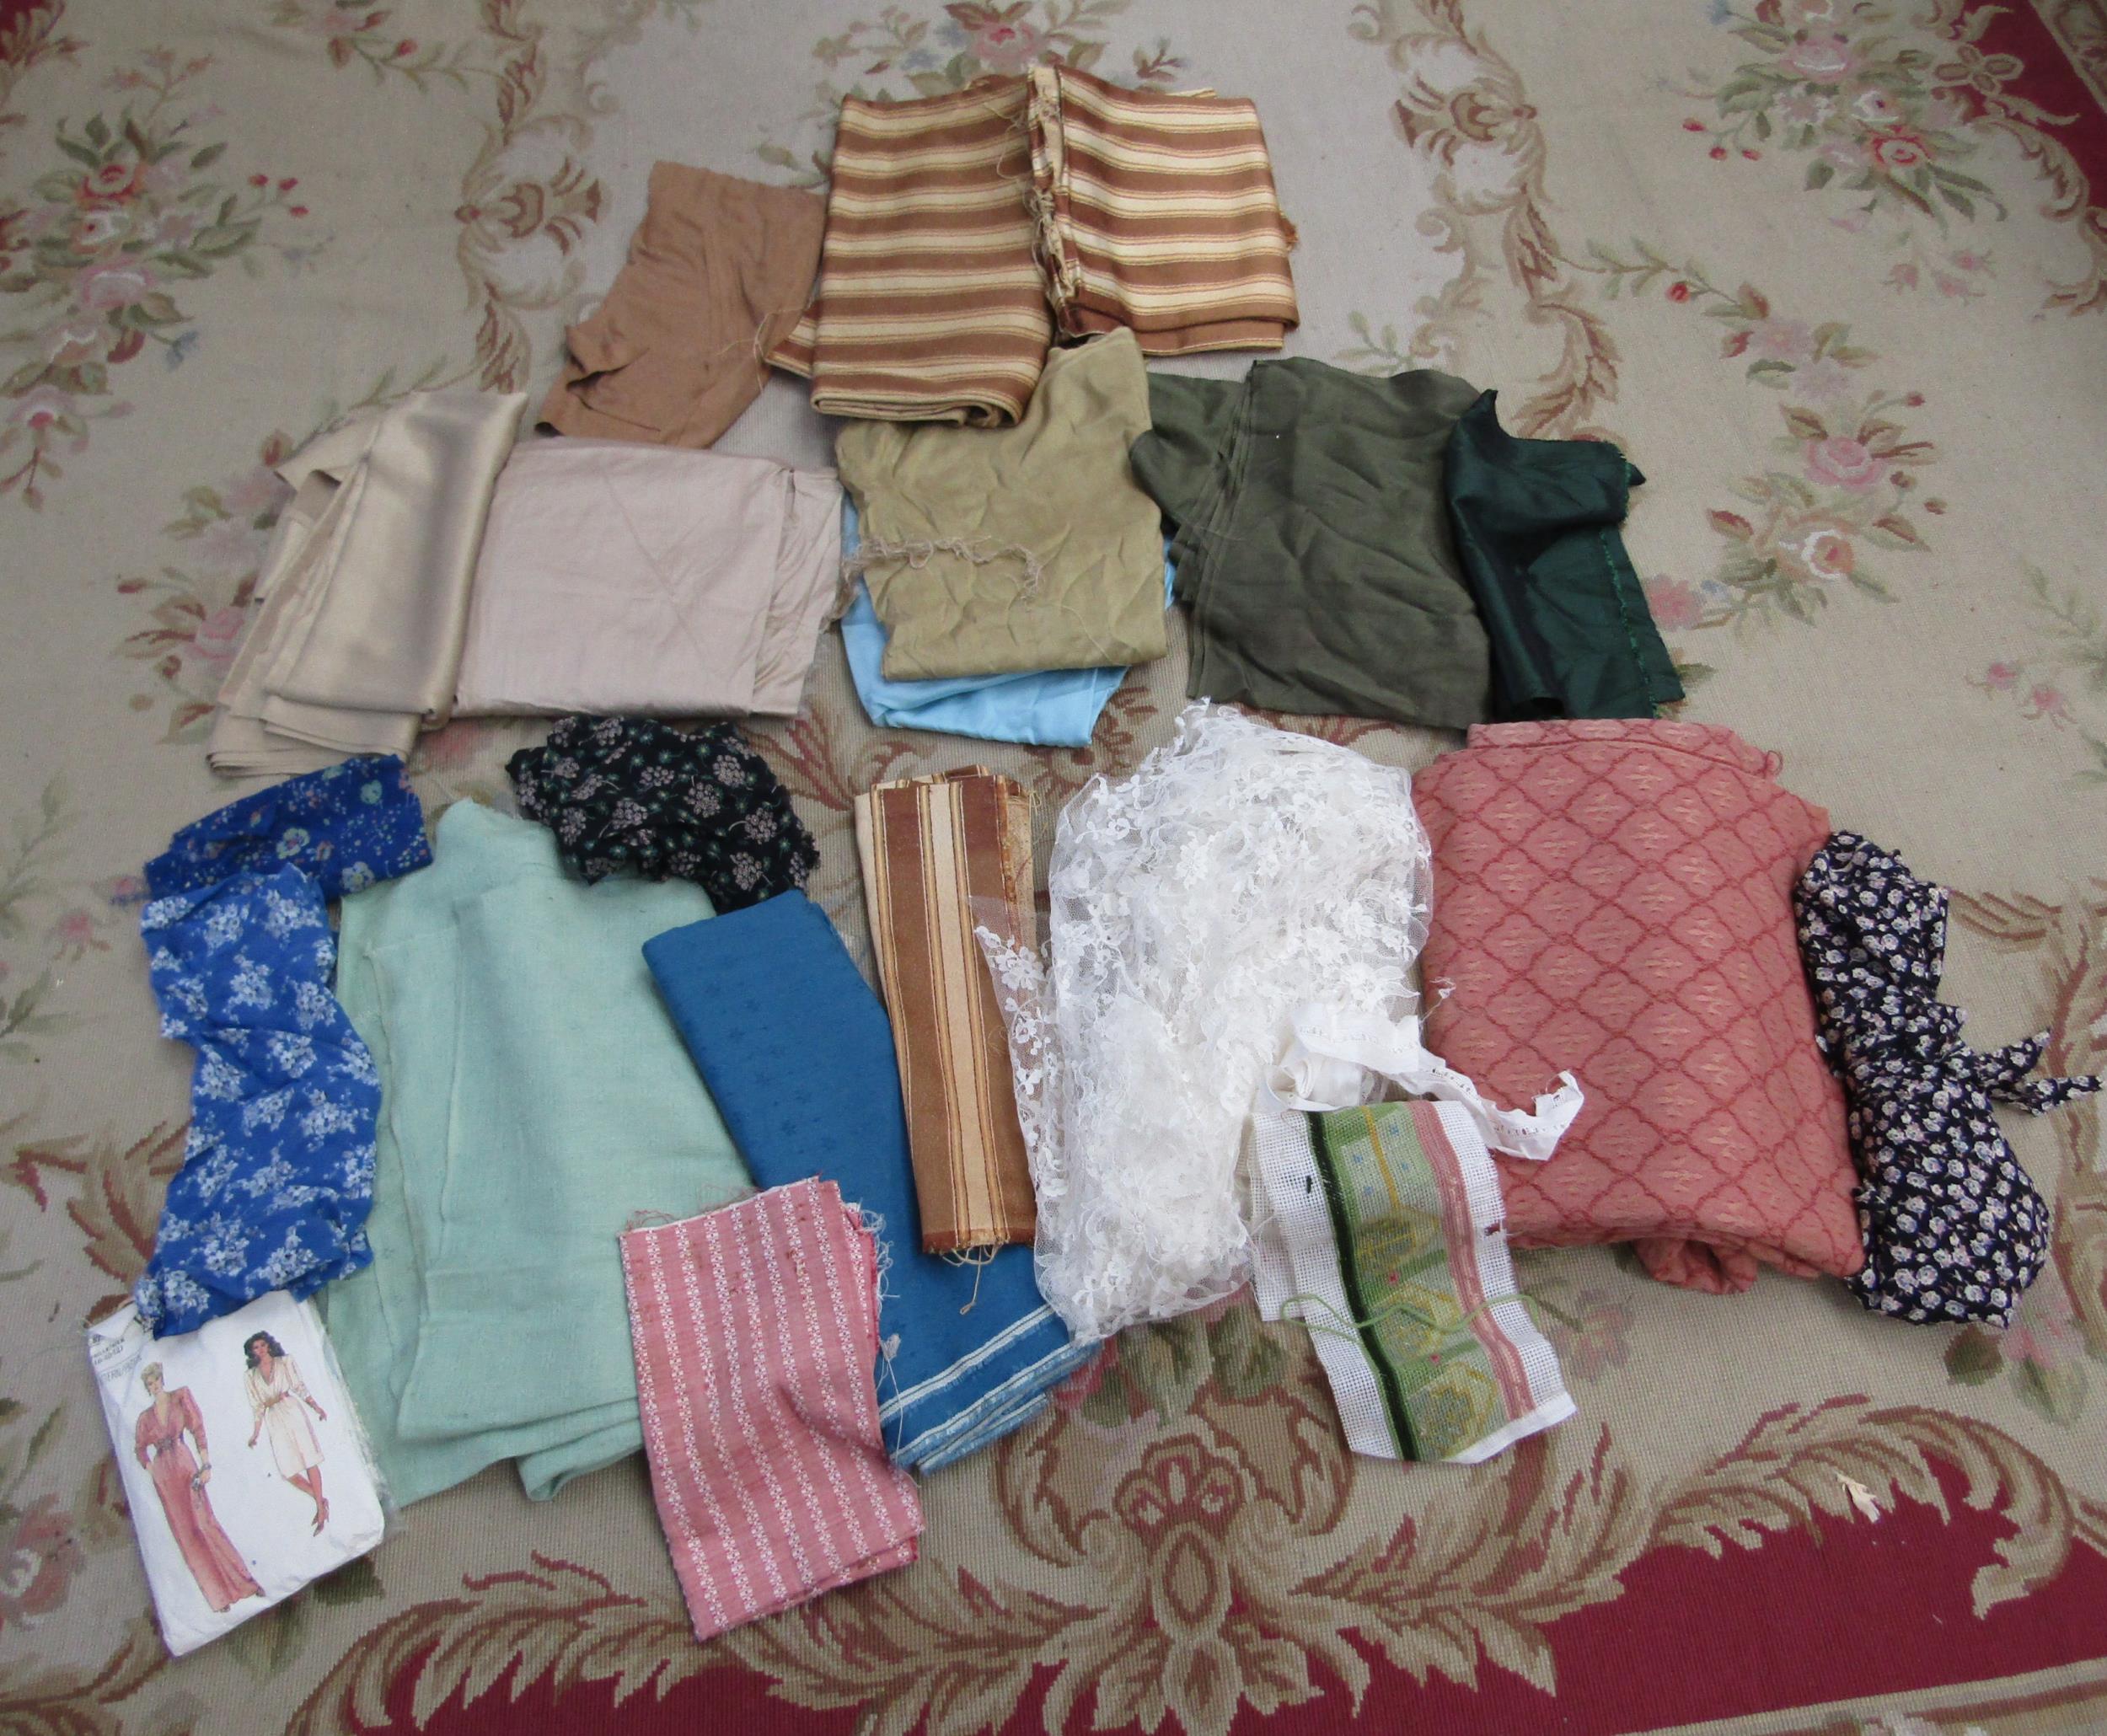 A quantity of mid 20th Century fabric remnants